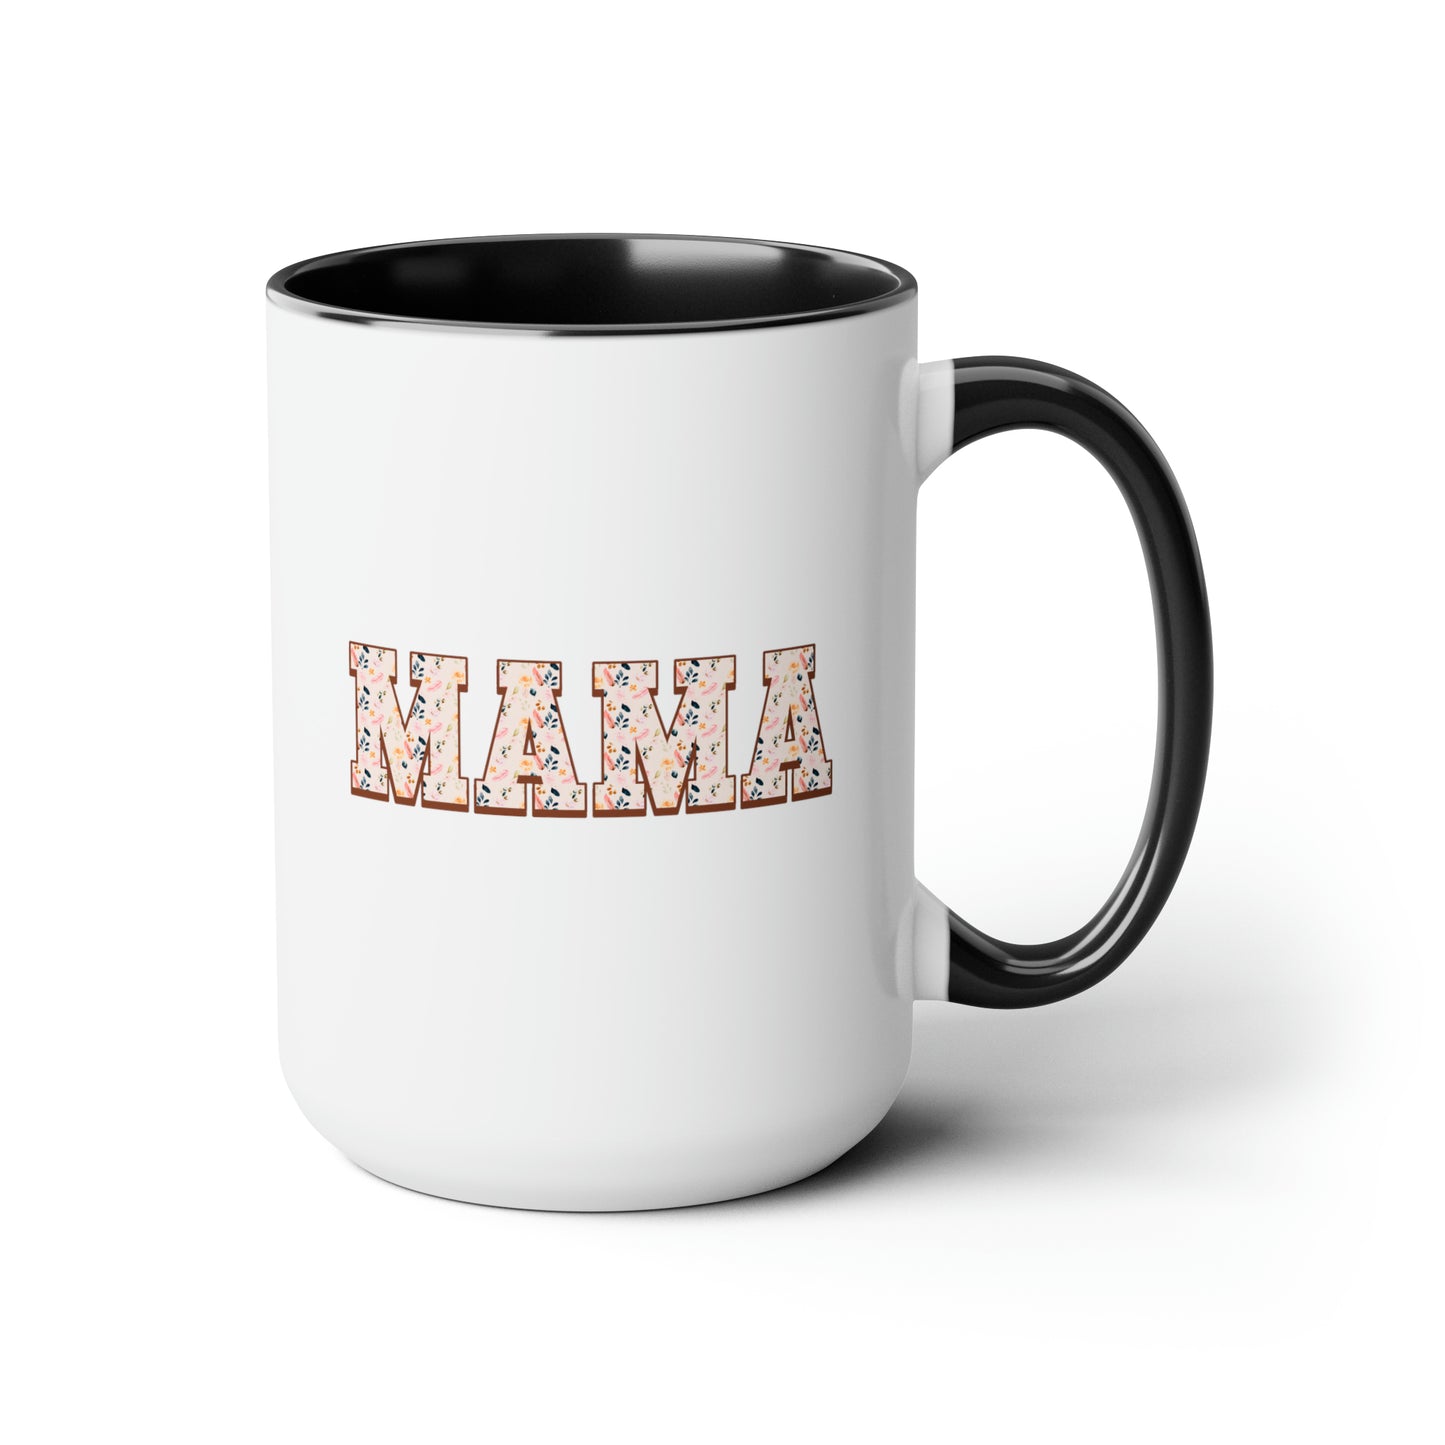 Mama 15oz white with black accent funny large coffee mug gift forfloral cute mom mothers day new mommy mother keepsake grandma waveywares wavey wares wavywares wavy wares